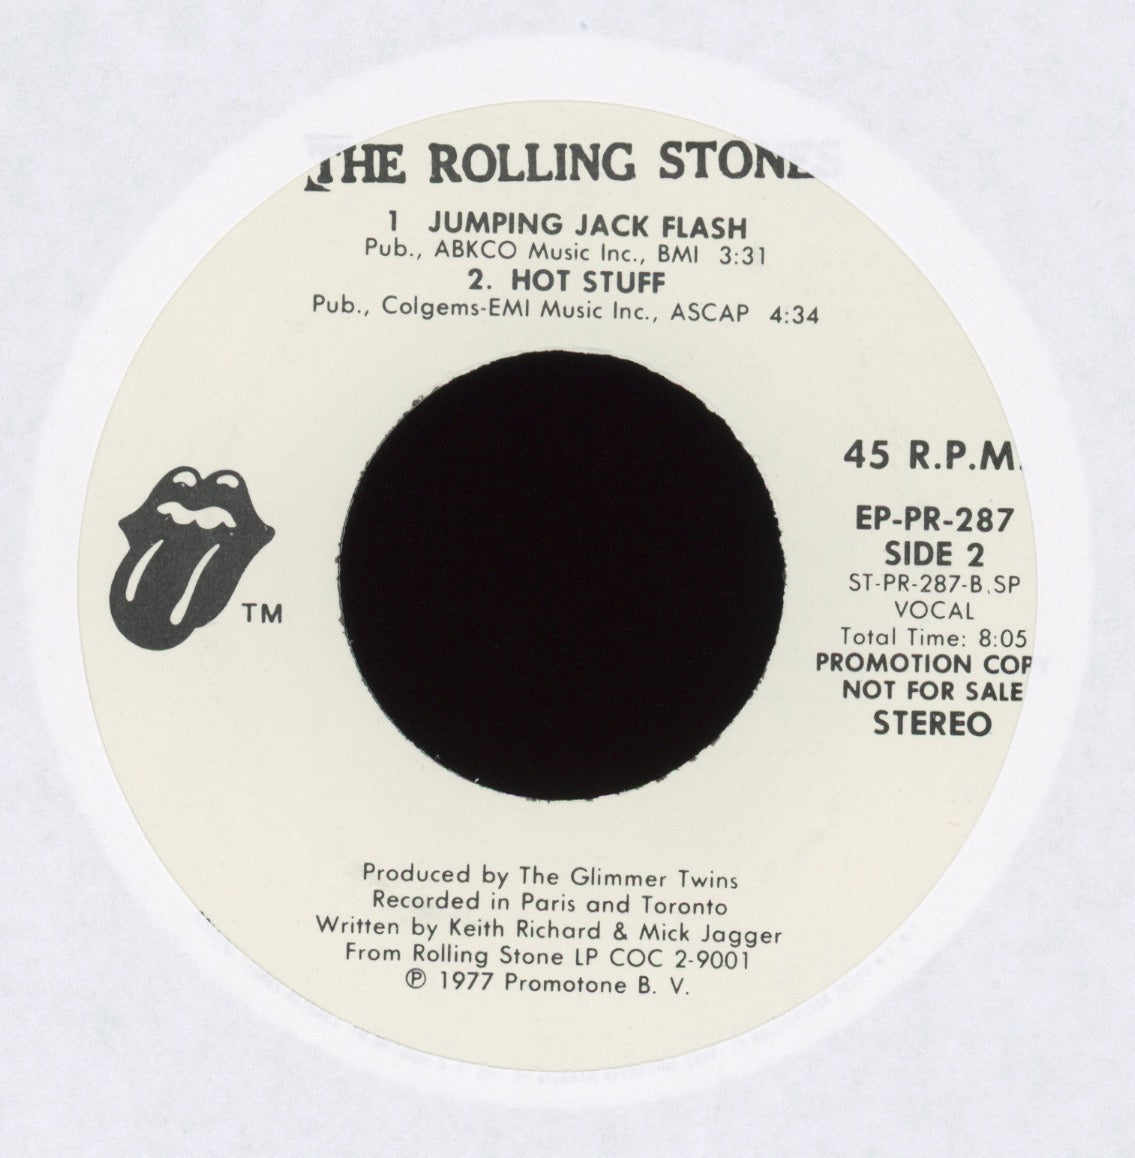 The Rolling Stones -  Rare Promo EP Sampler from the Love You Live LP